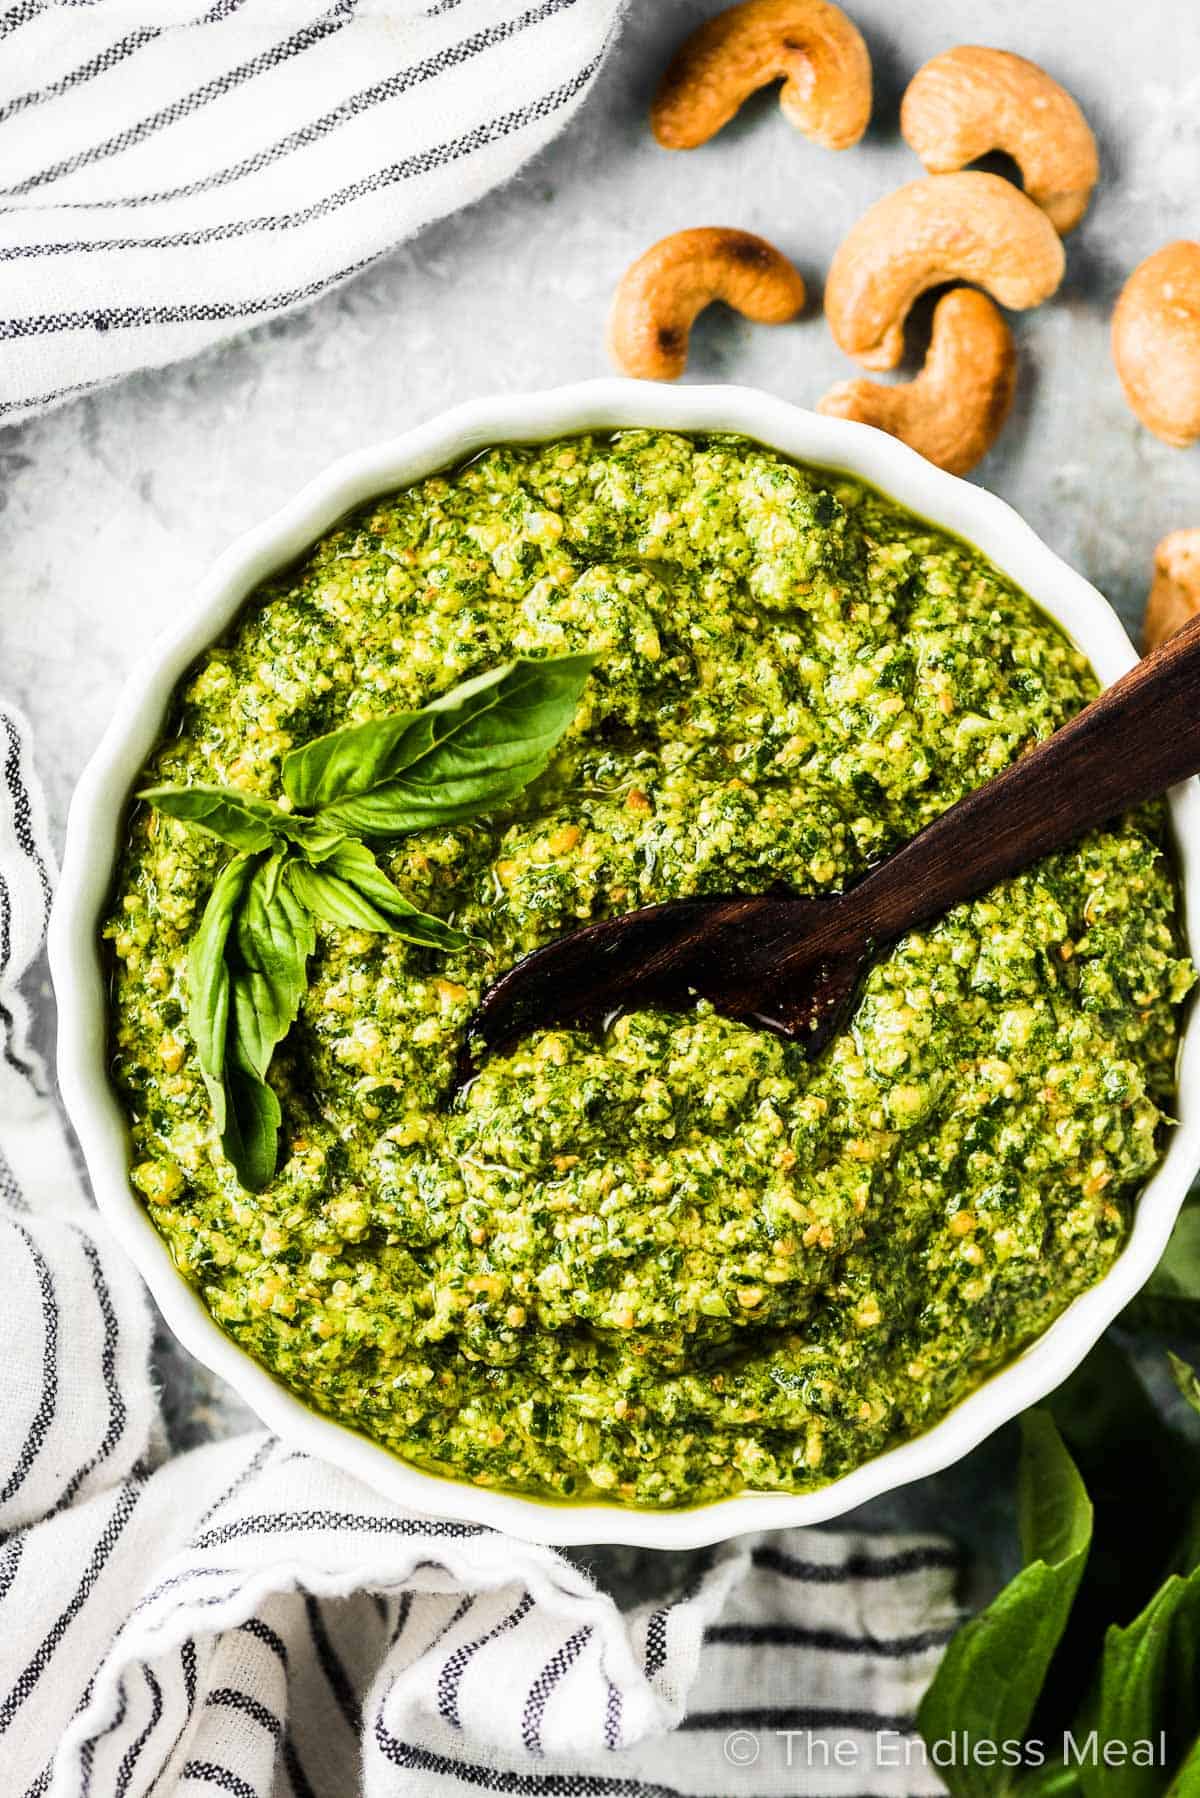 A white bowl of Whole30 pesto with a small wooden spoon in it and some cashews on the side.